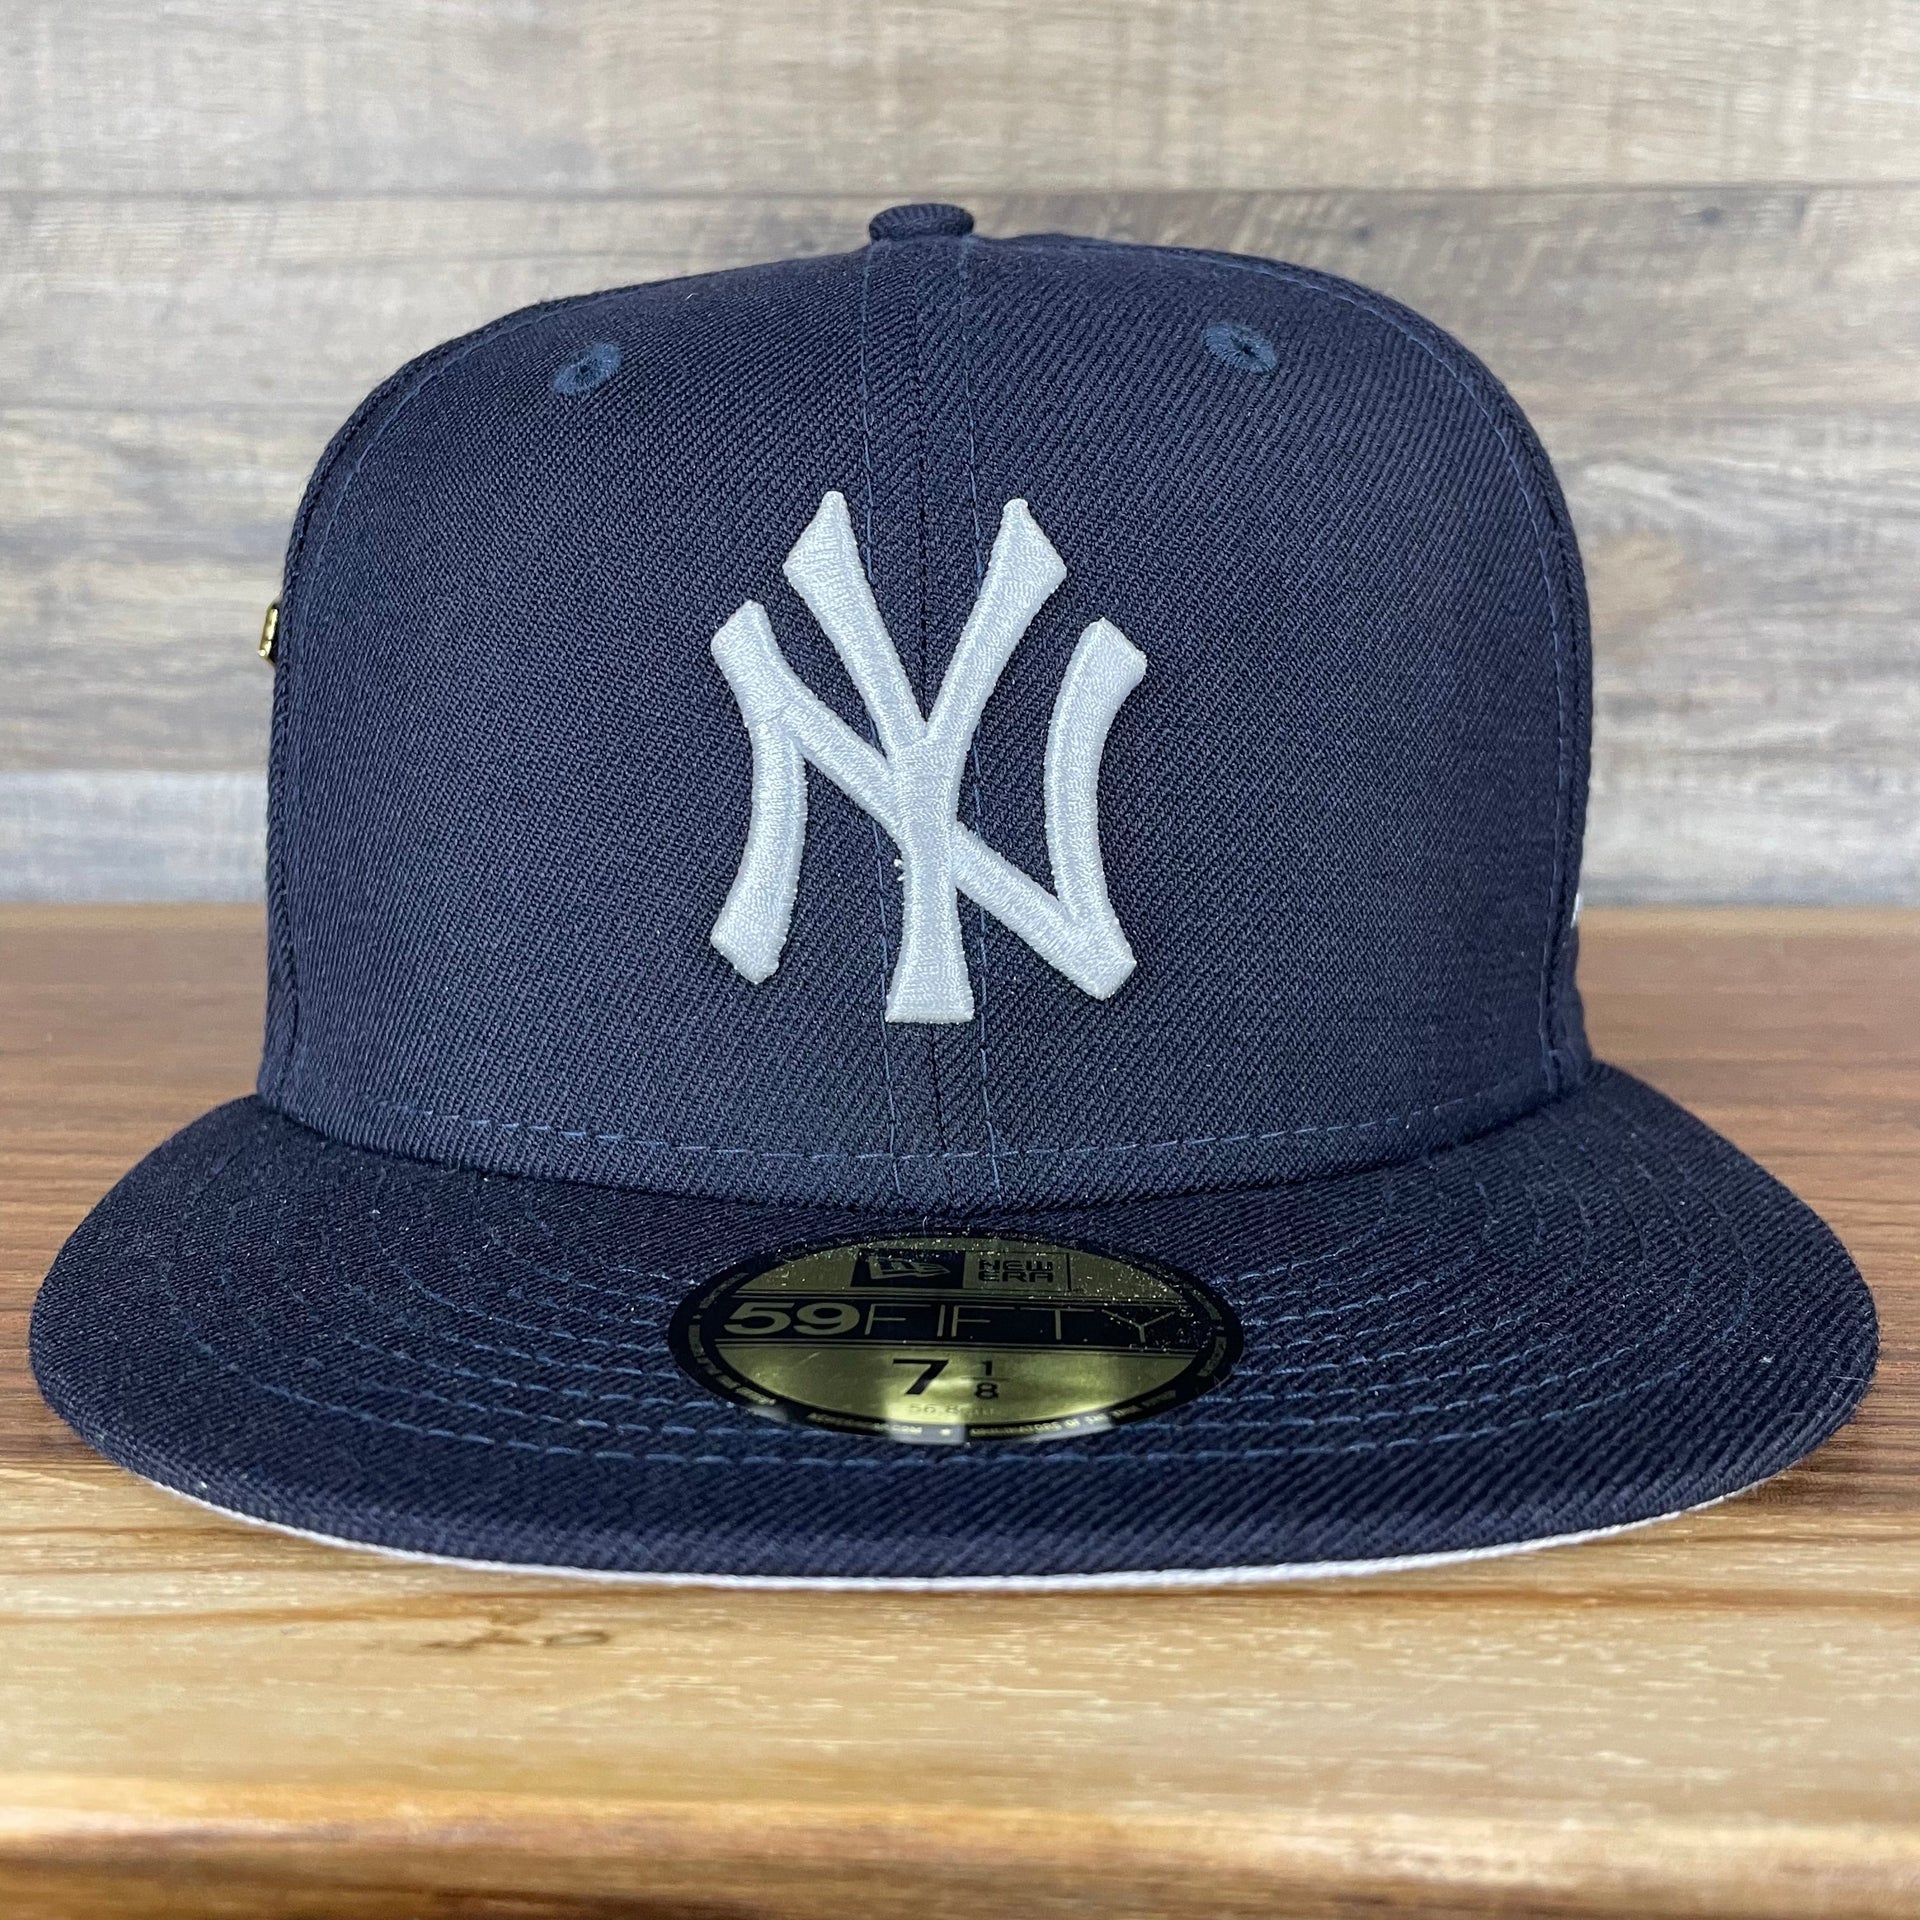 The front of the New York Yankees Cooperstown 5950 Day Side Patch Gray Bottom 59Fifty Fitted Cap